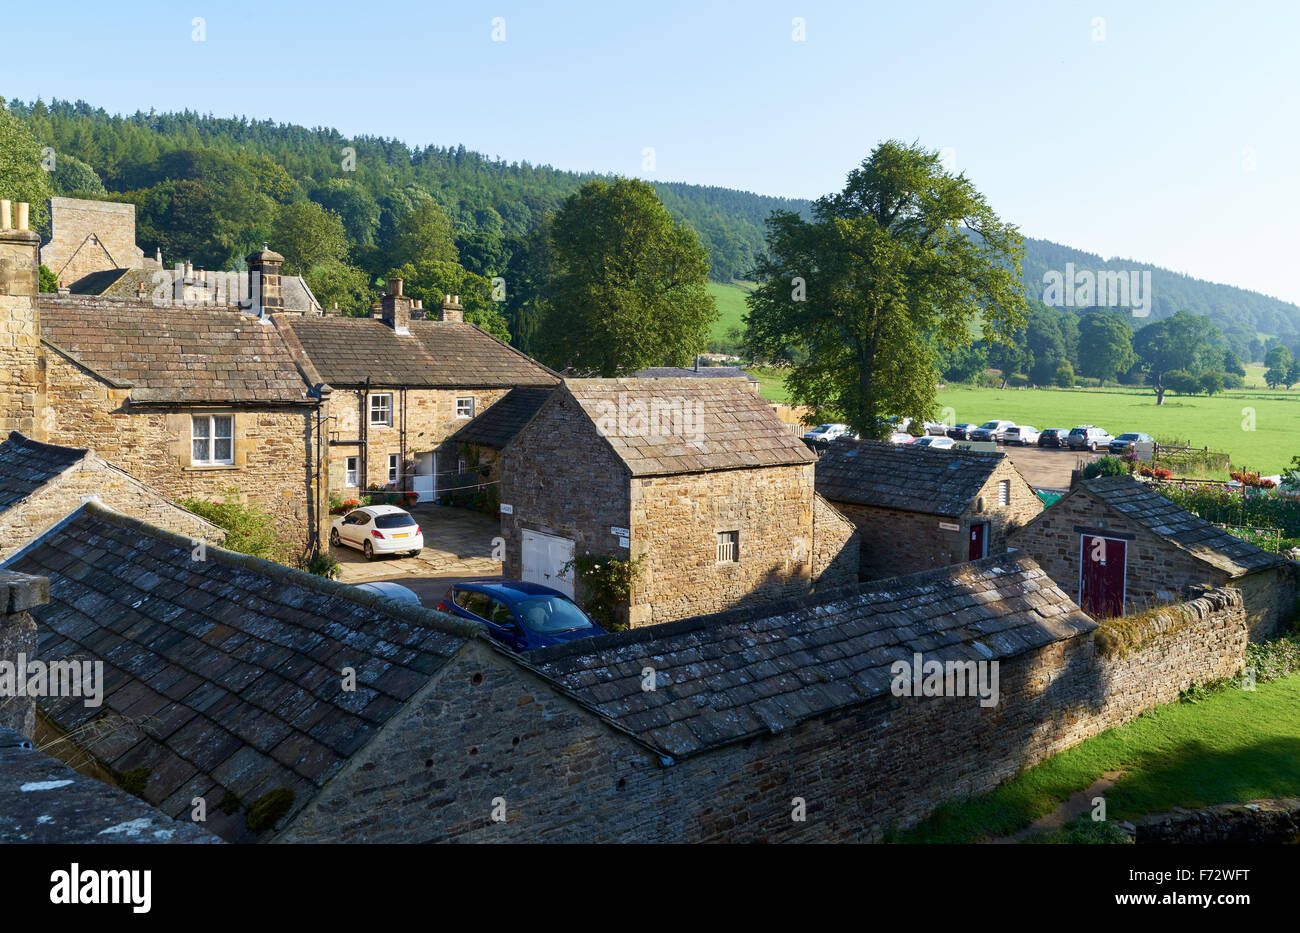 Blanchland village in County Durham, English countryside. Stock Photo